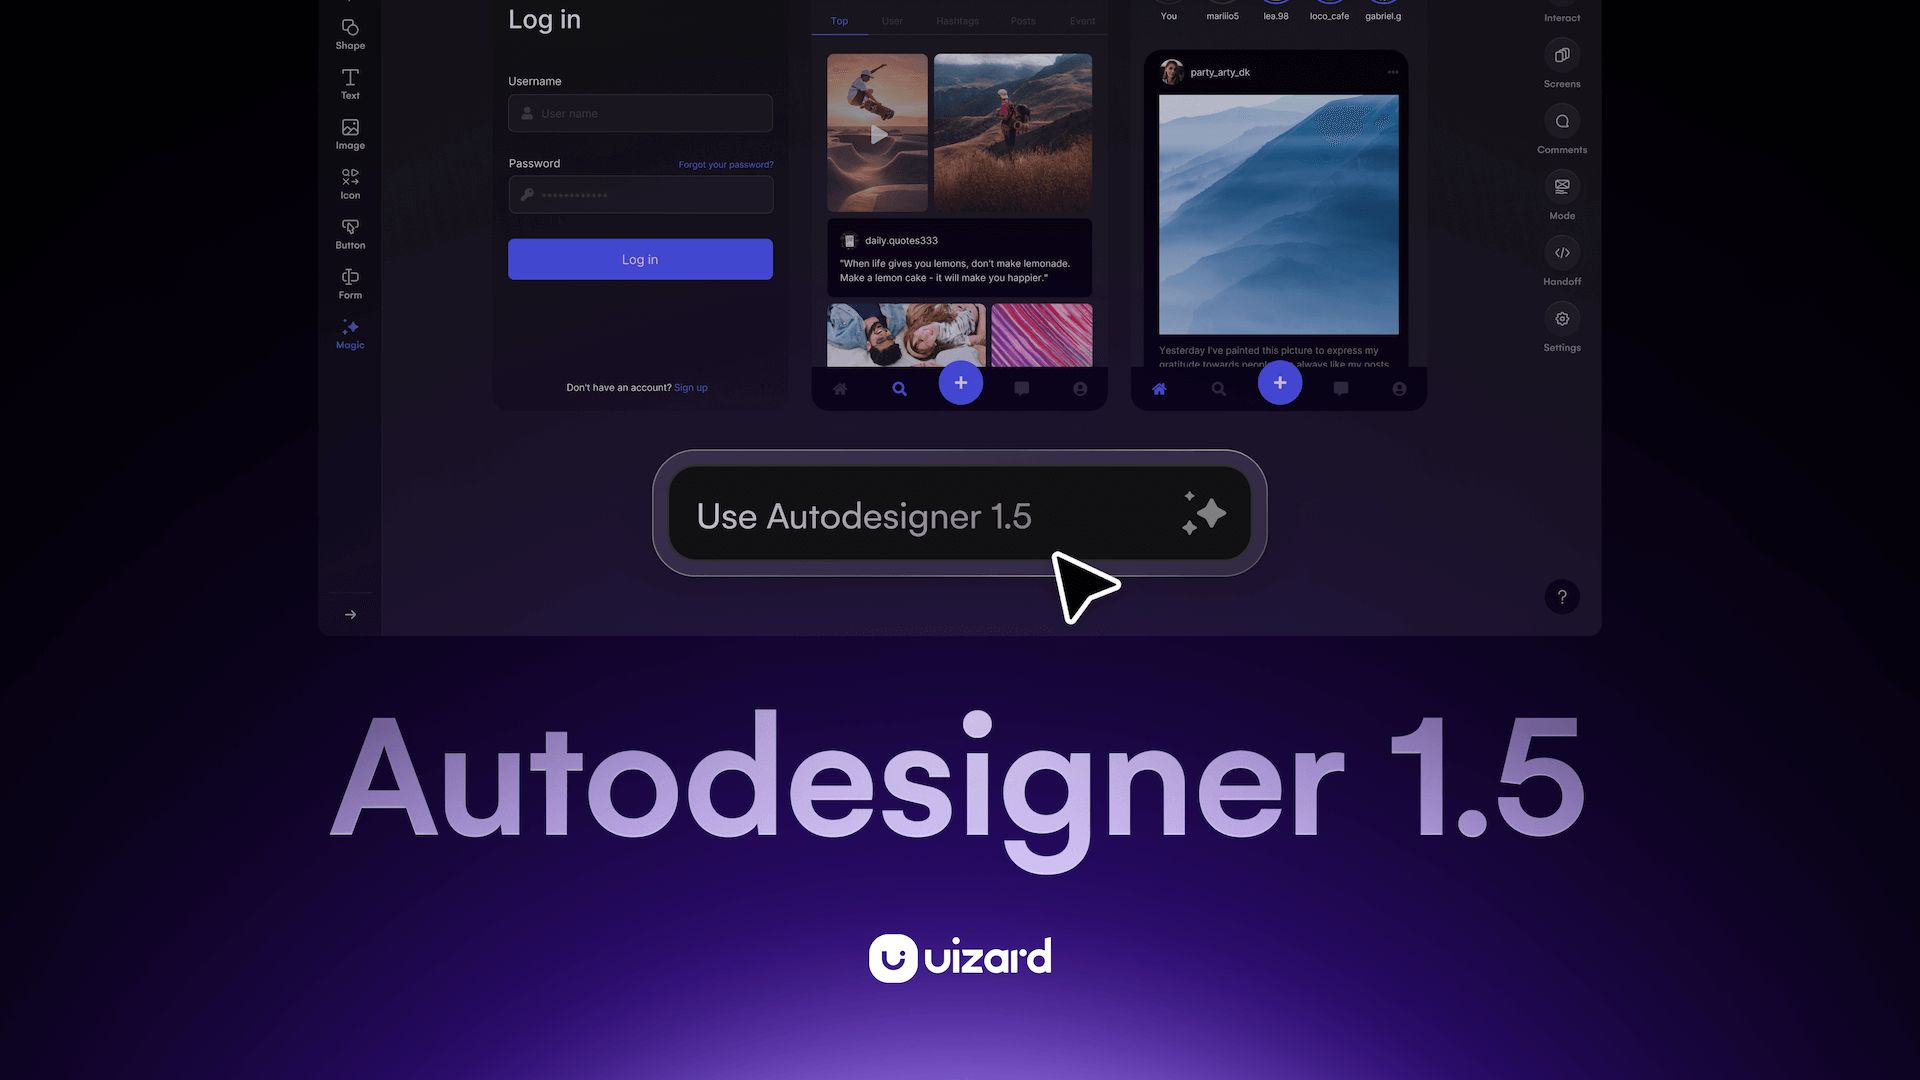 Hero video showing the technology of Uizard Autodesigner in context with a use case.